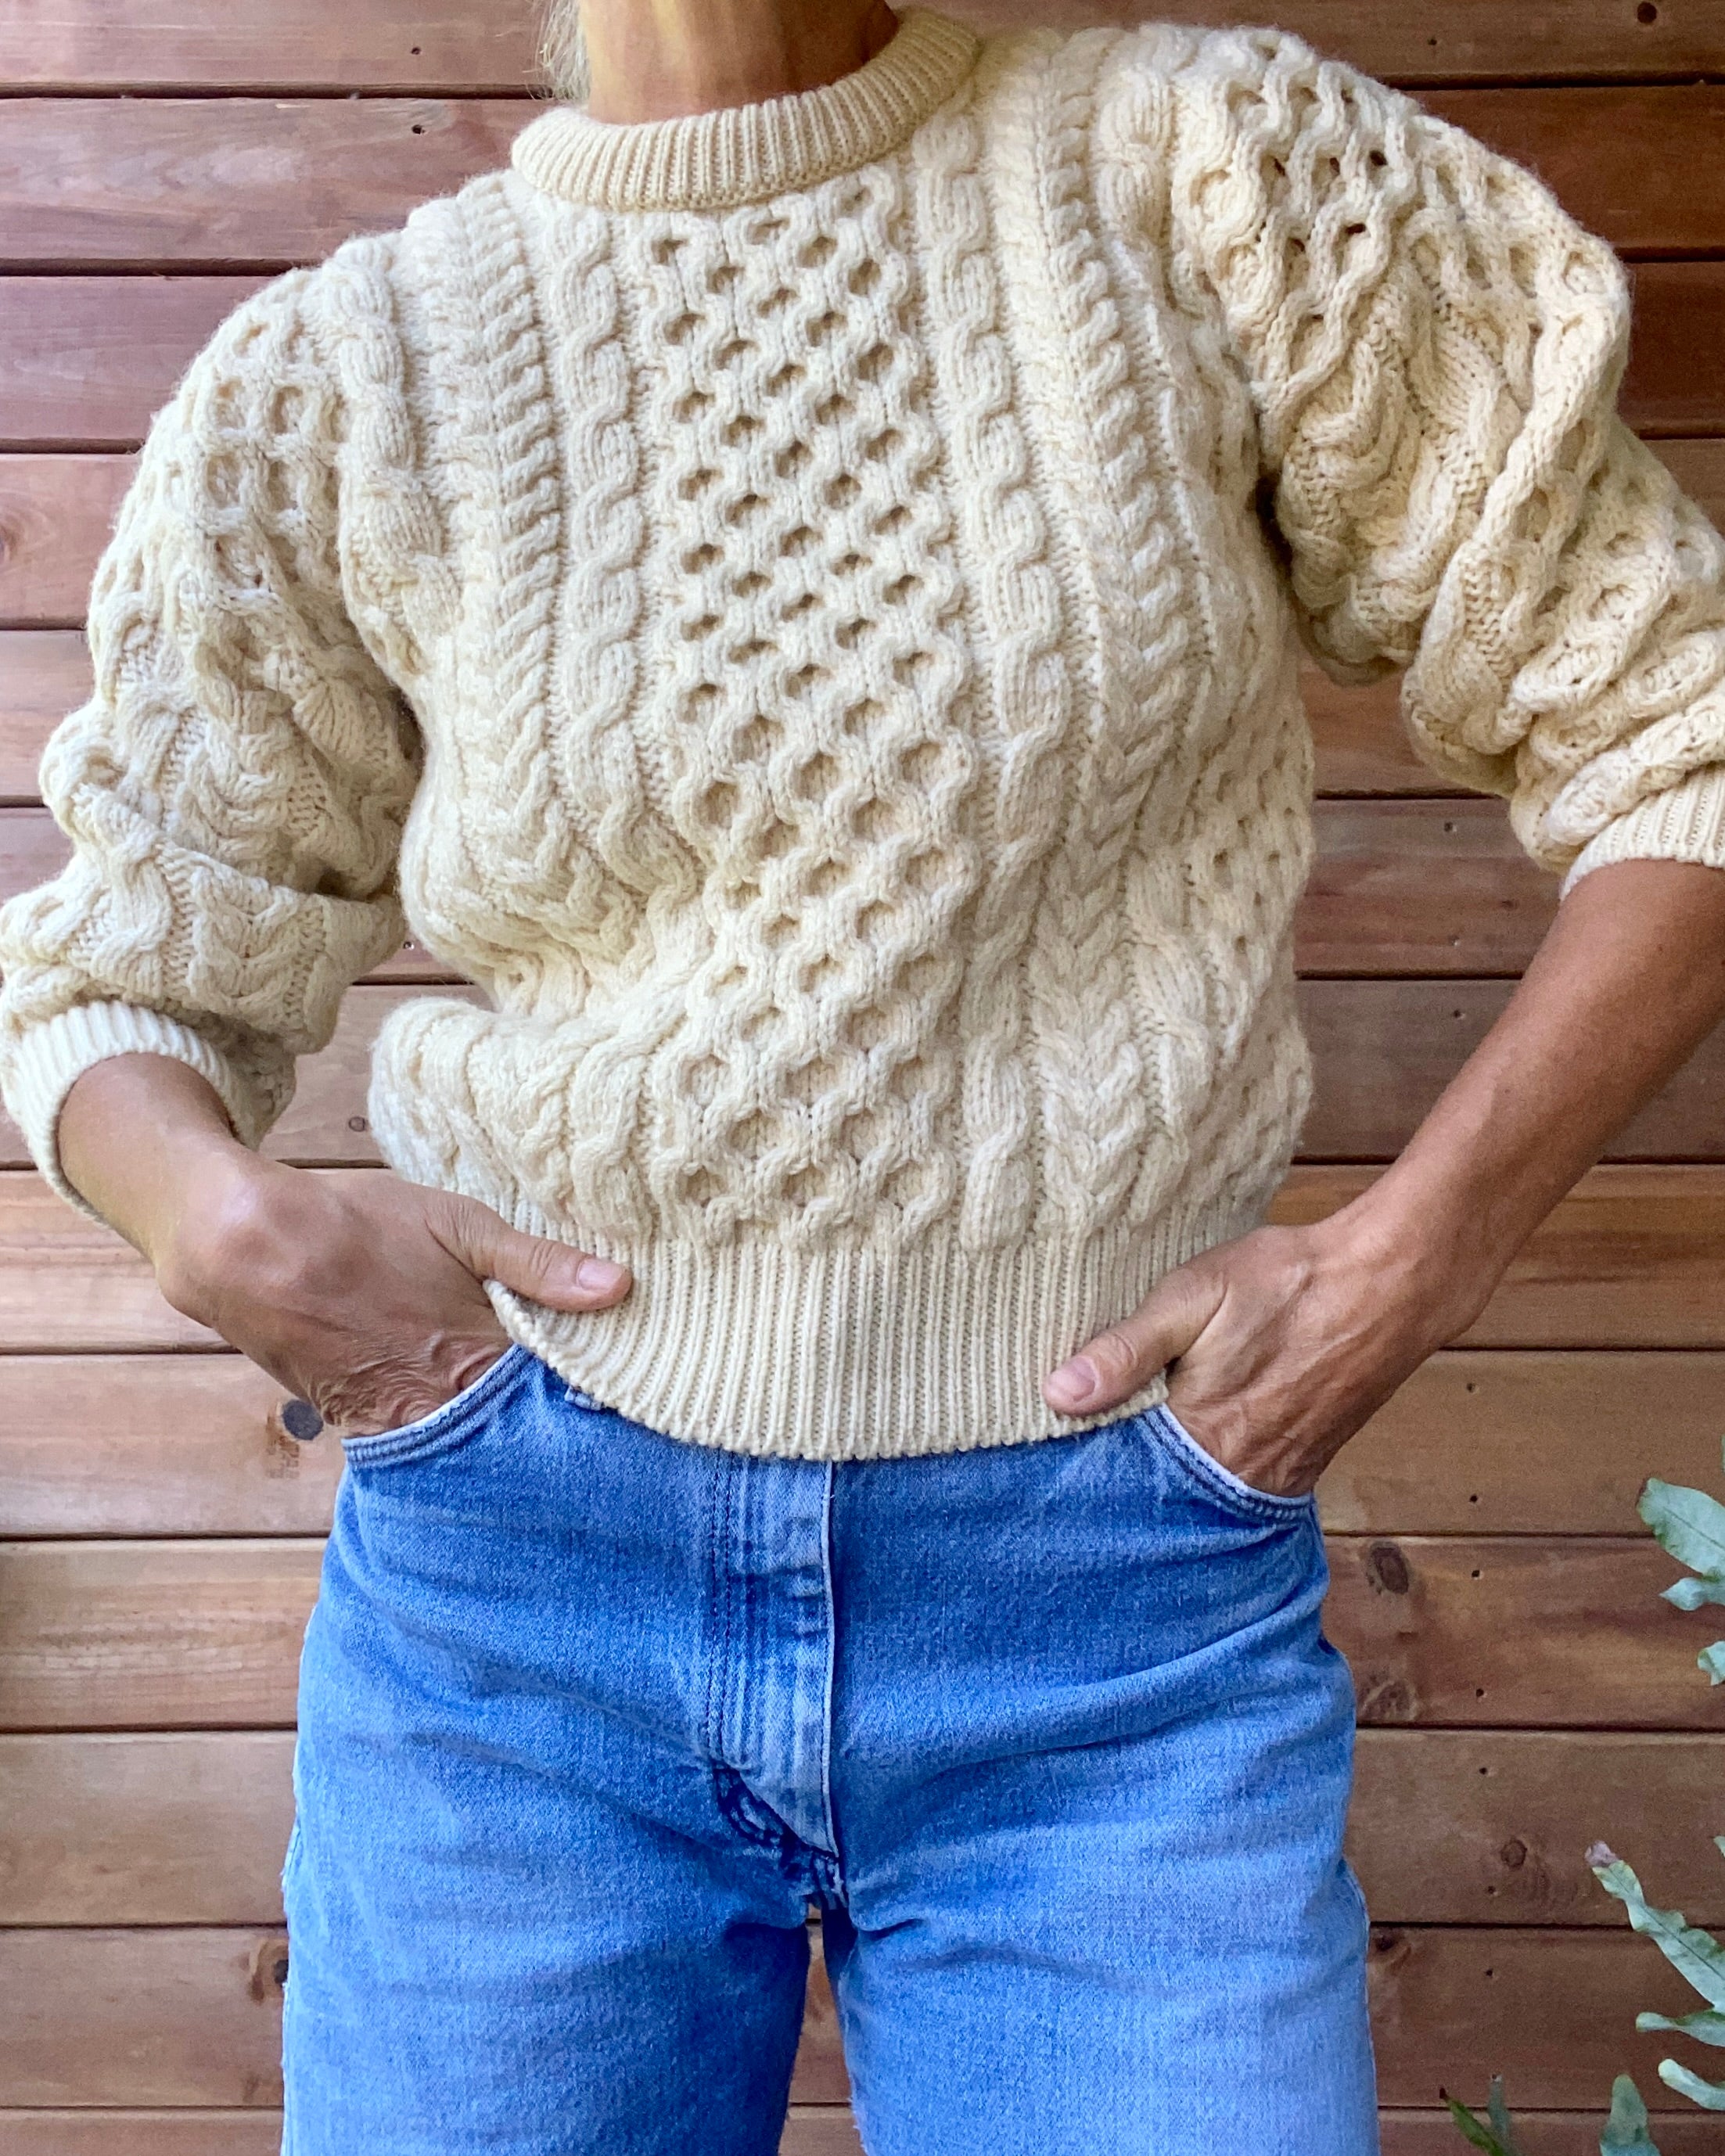 Vintage Handknit Honeycomb Cable Fisherman Sweater XS S